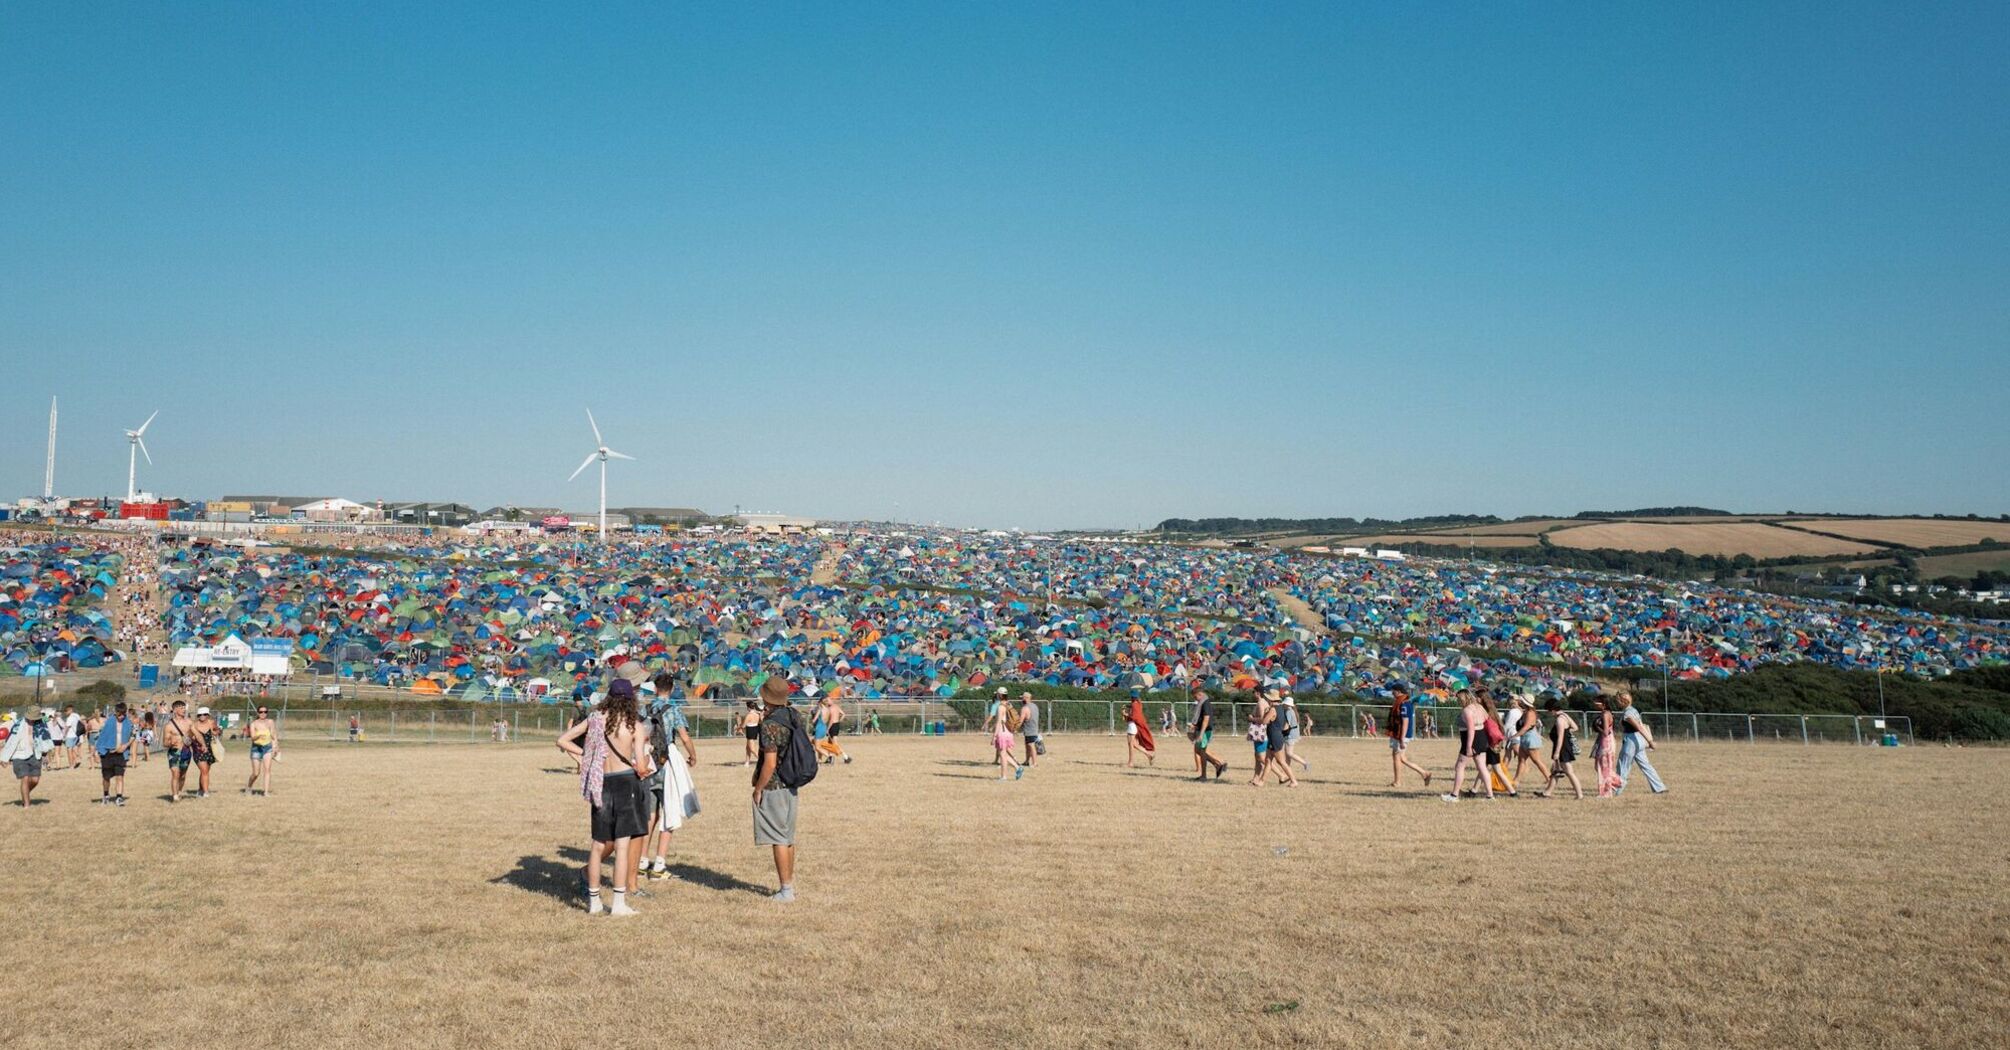 Festival goers walking towards a large campsite filled with colorful tents under a clear blue sky at Boardmasters